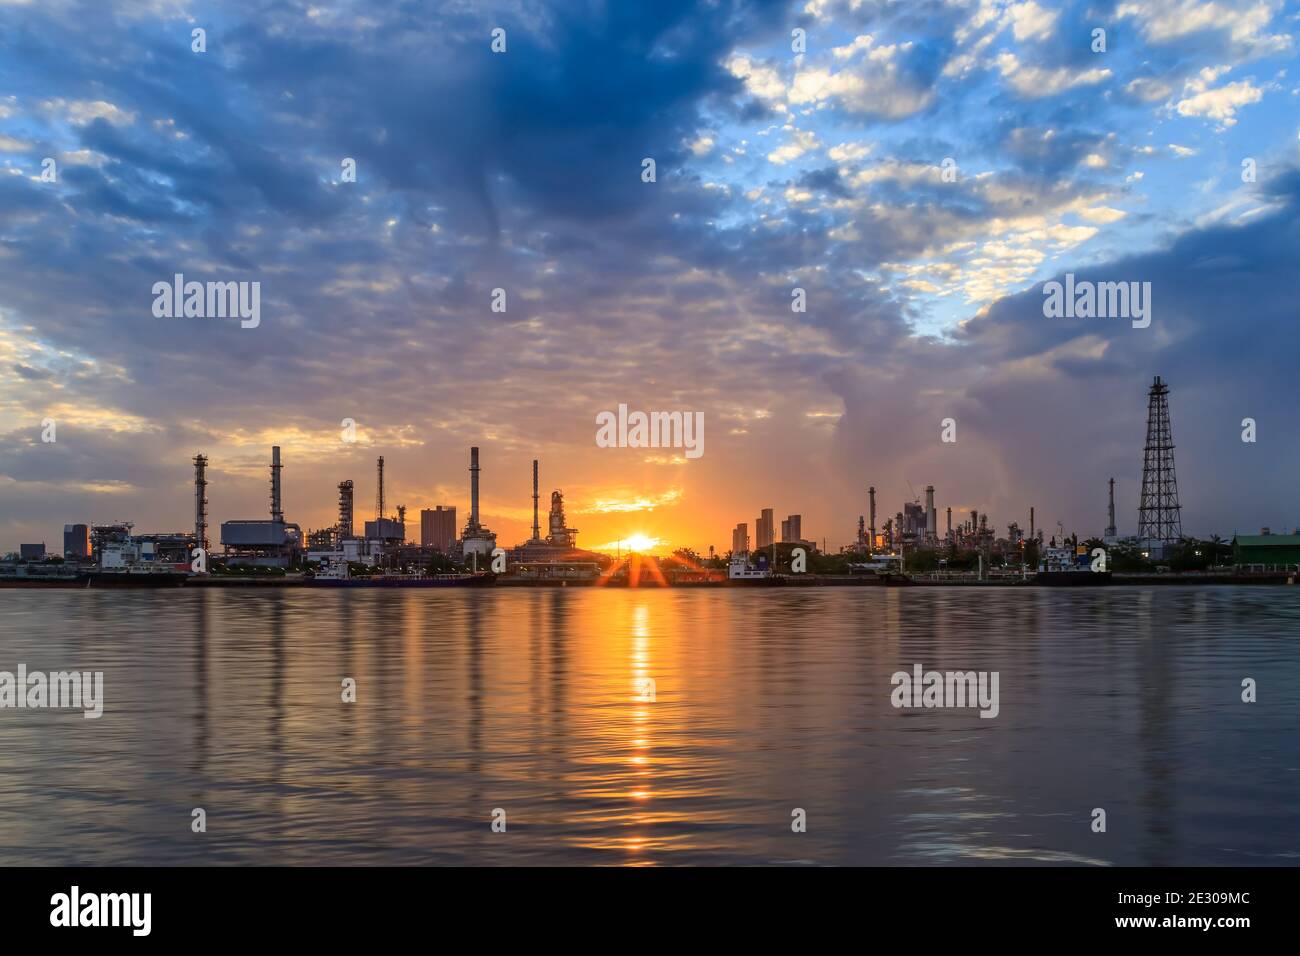 Oil and gas refinery plant factory with refection on river at sunrise. petrochemical and energy industry concept. Stock Photo